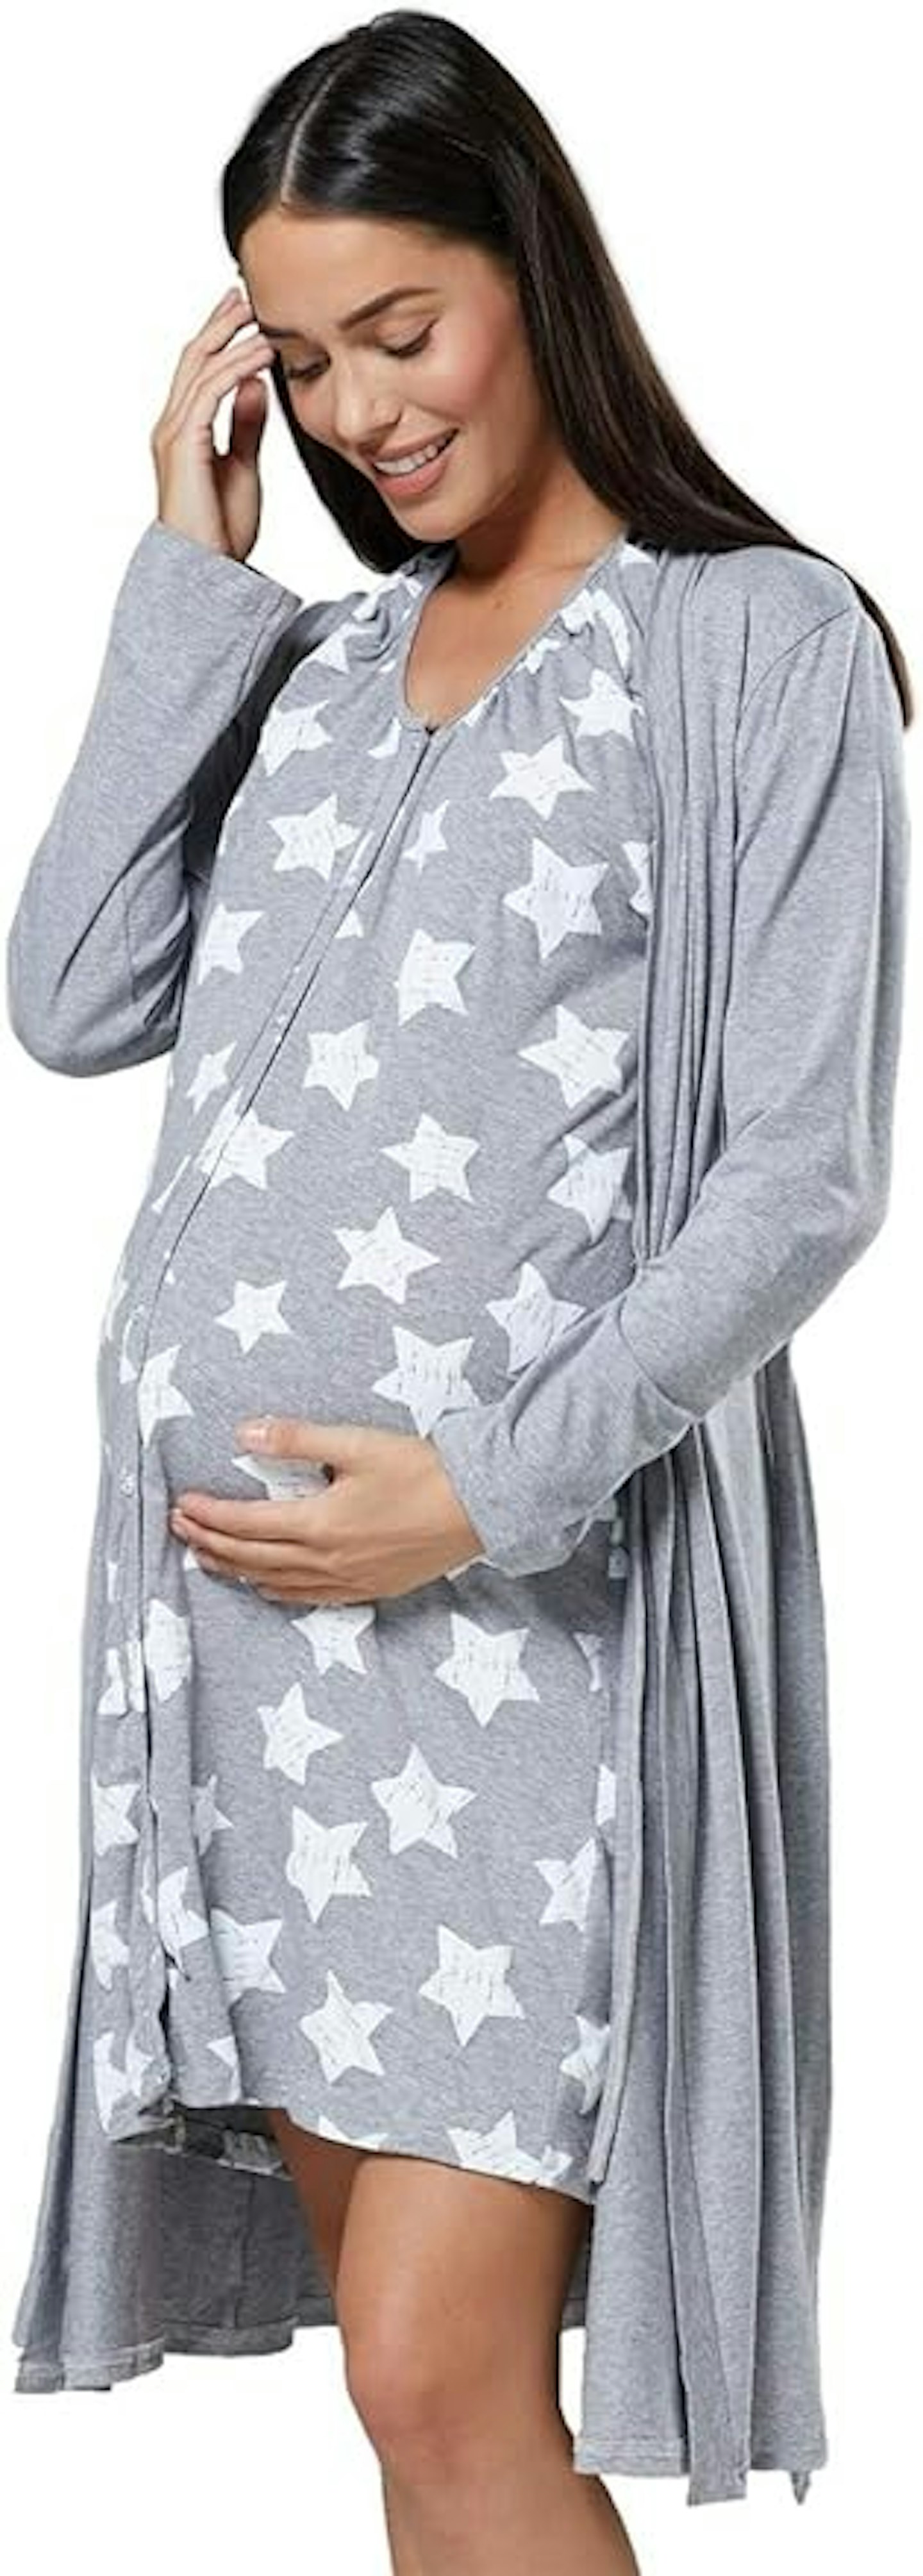 Maternity Hospital Bag Birthing Gown in Organic Cotton